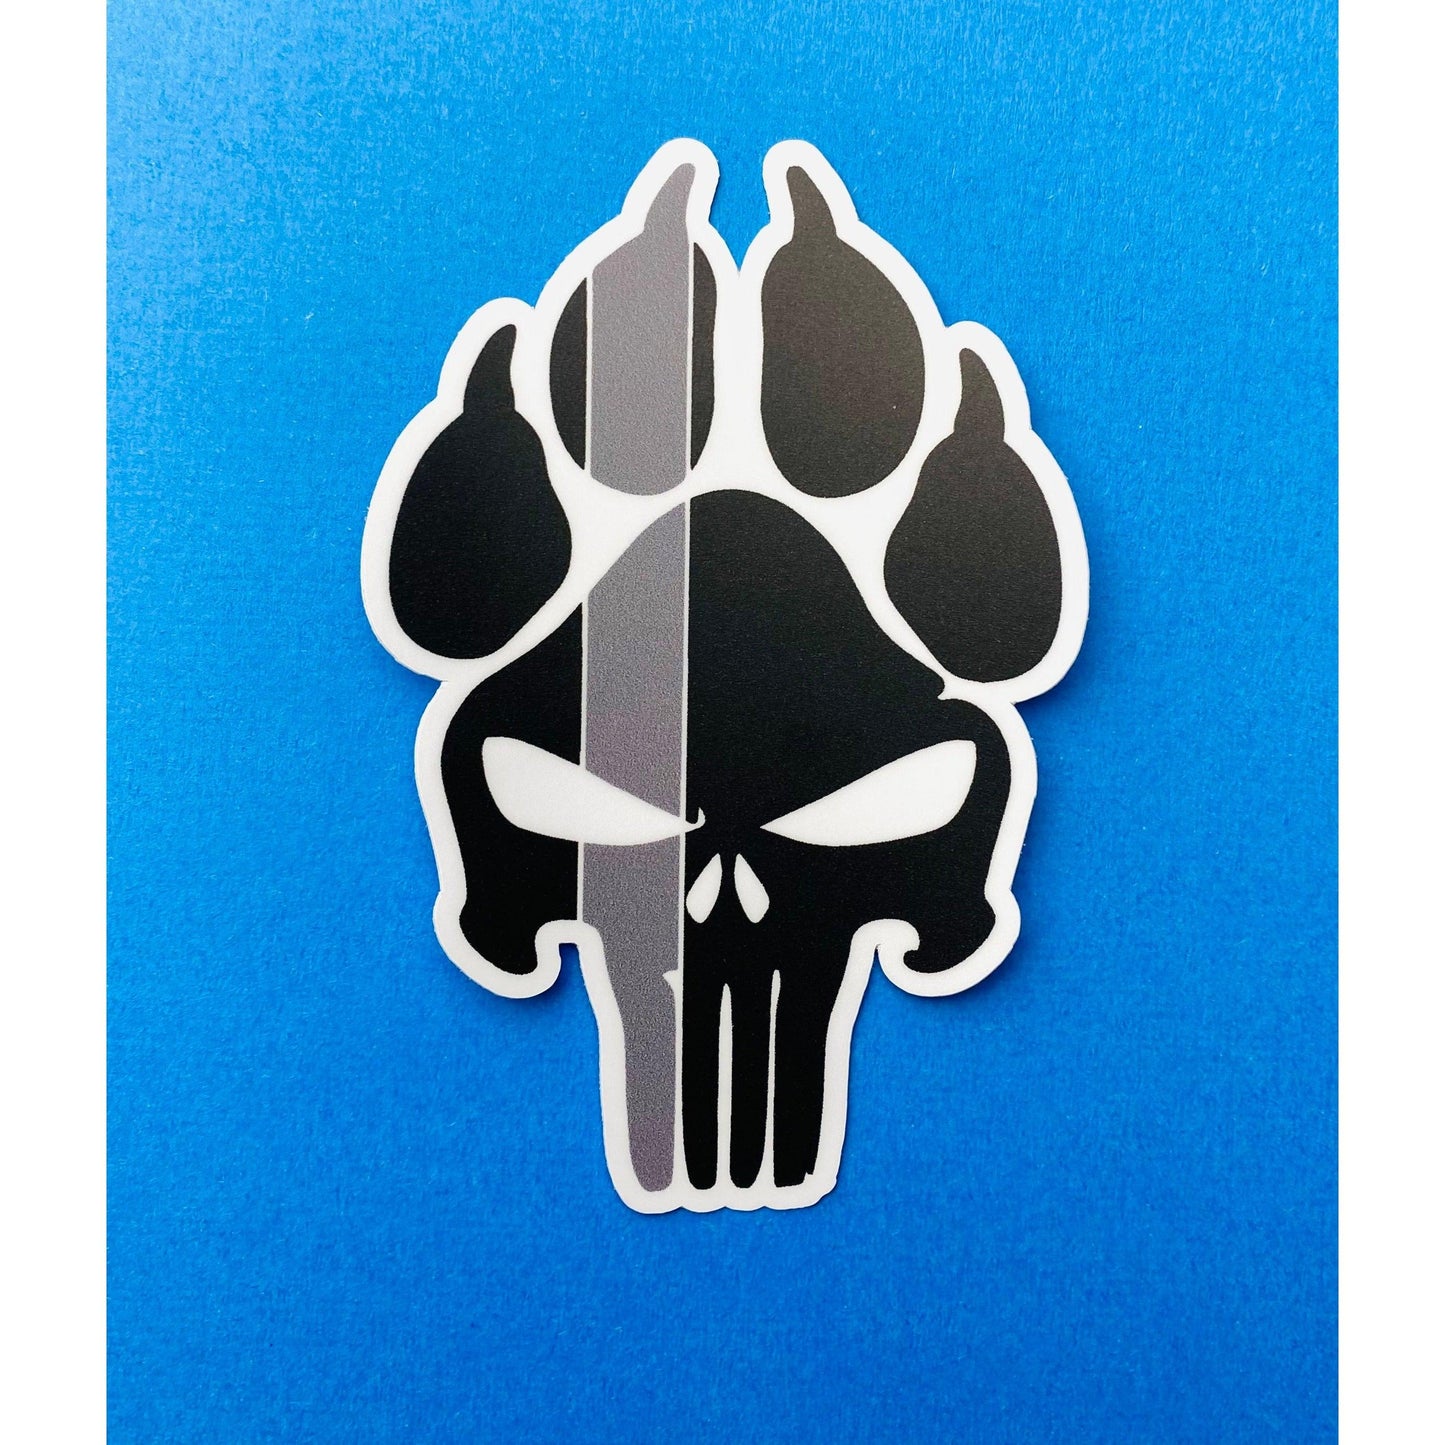 Corrections Officer K9 Police Punisher Pawprint Sticker, Sticker for Police K9 Handler, Dept of Corrections, Law Enforcement - Ottos Grotto :: Stickers For Your Stuff